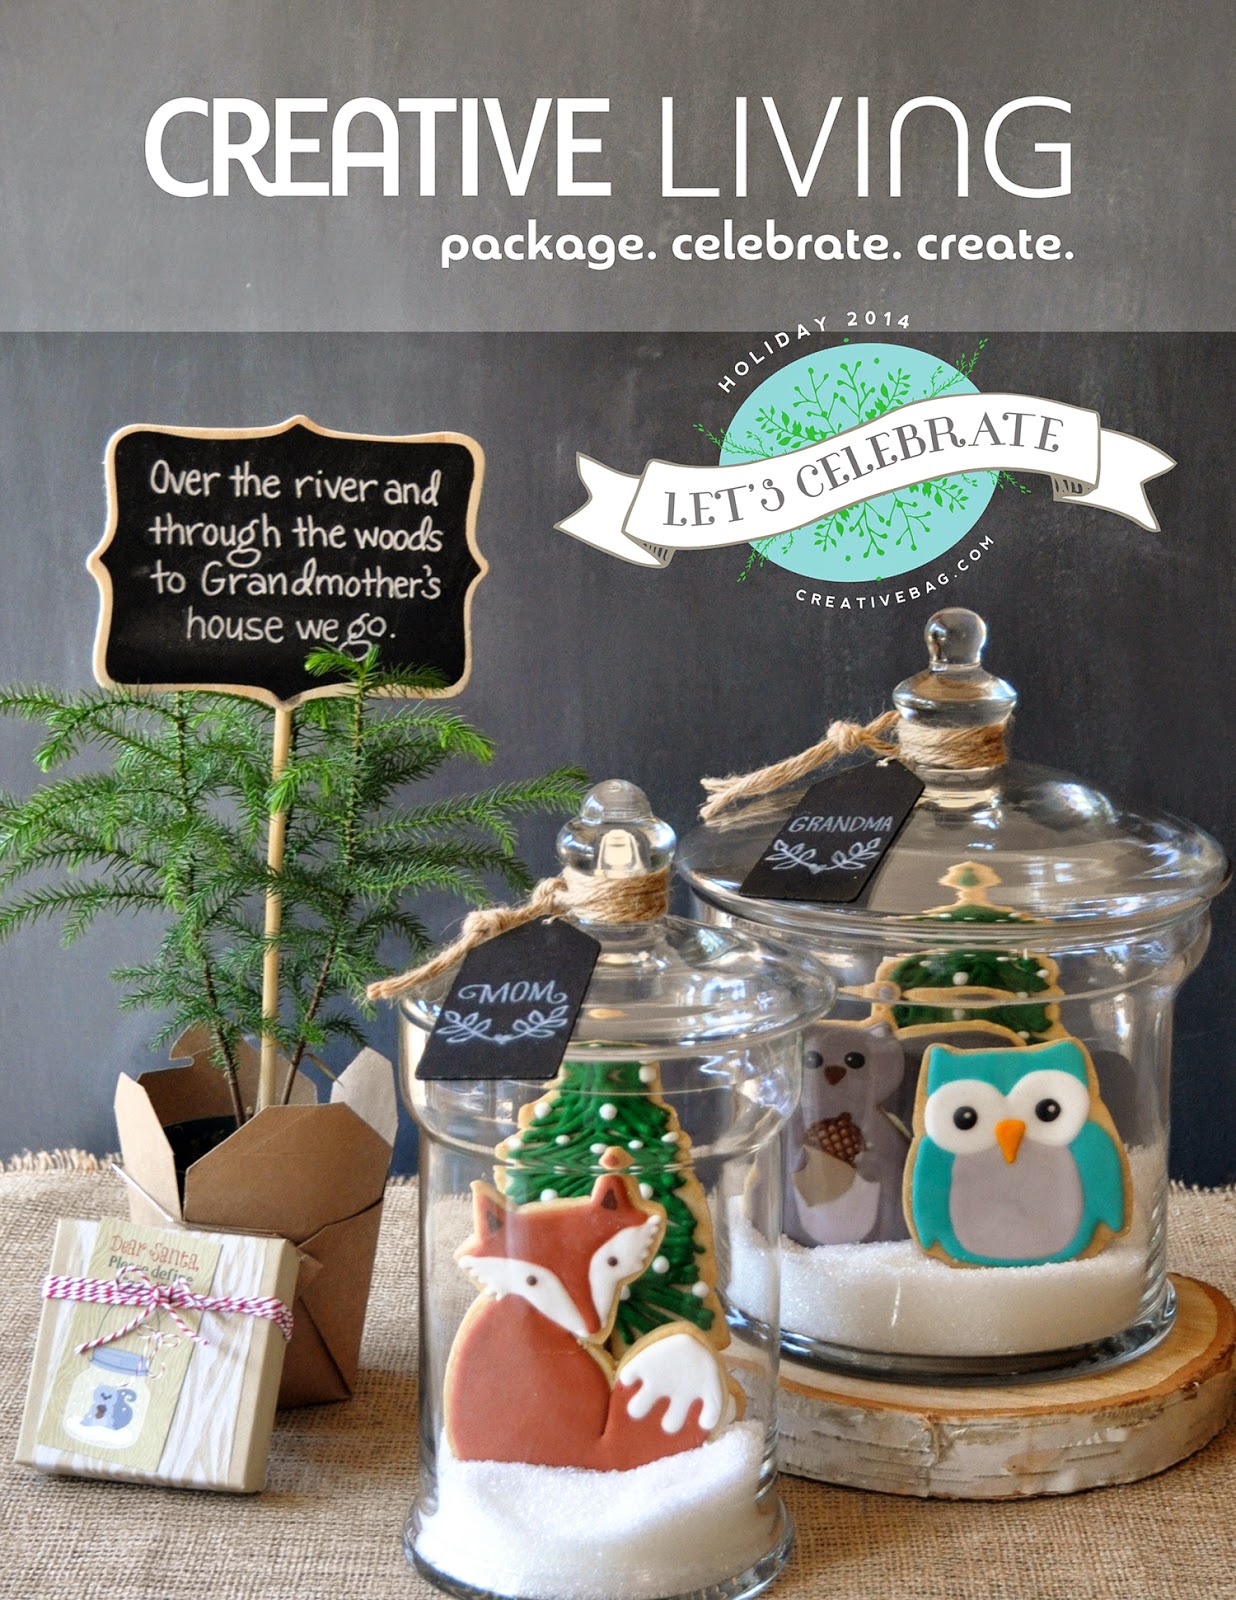 Let's Celebrate - holiday 2014 | Creative Living online magazine 